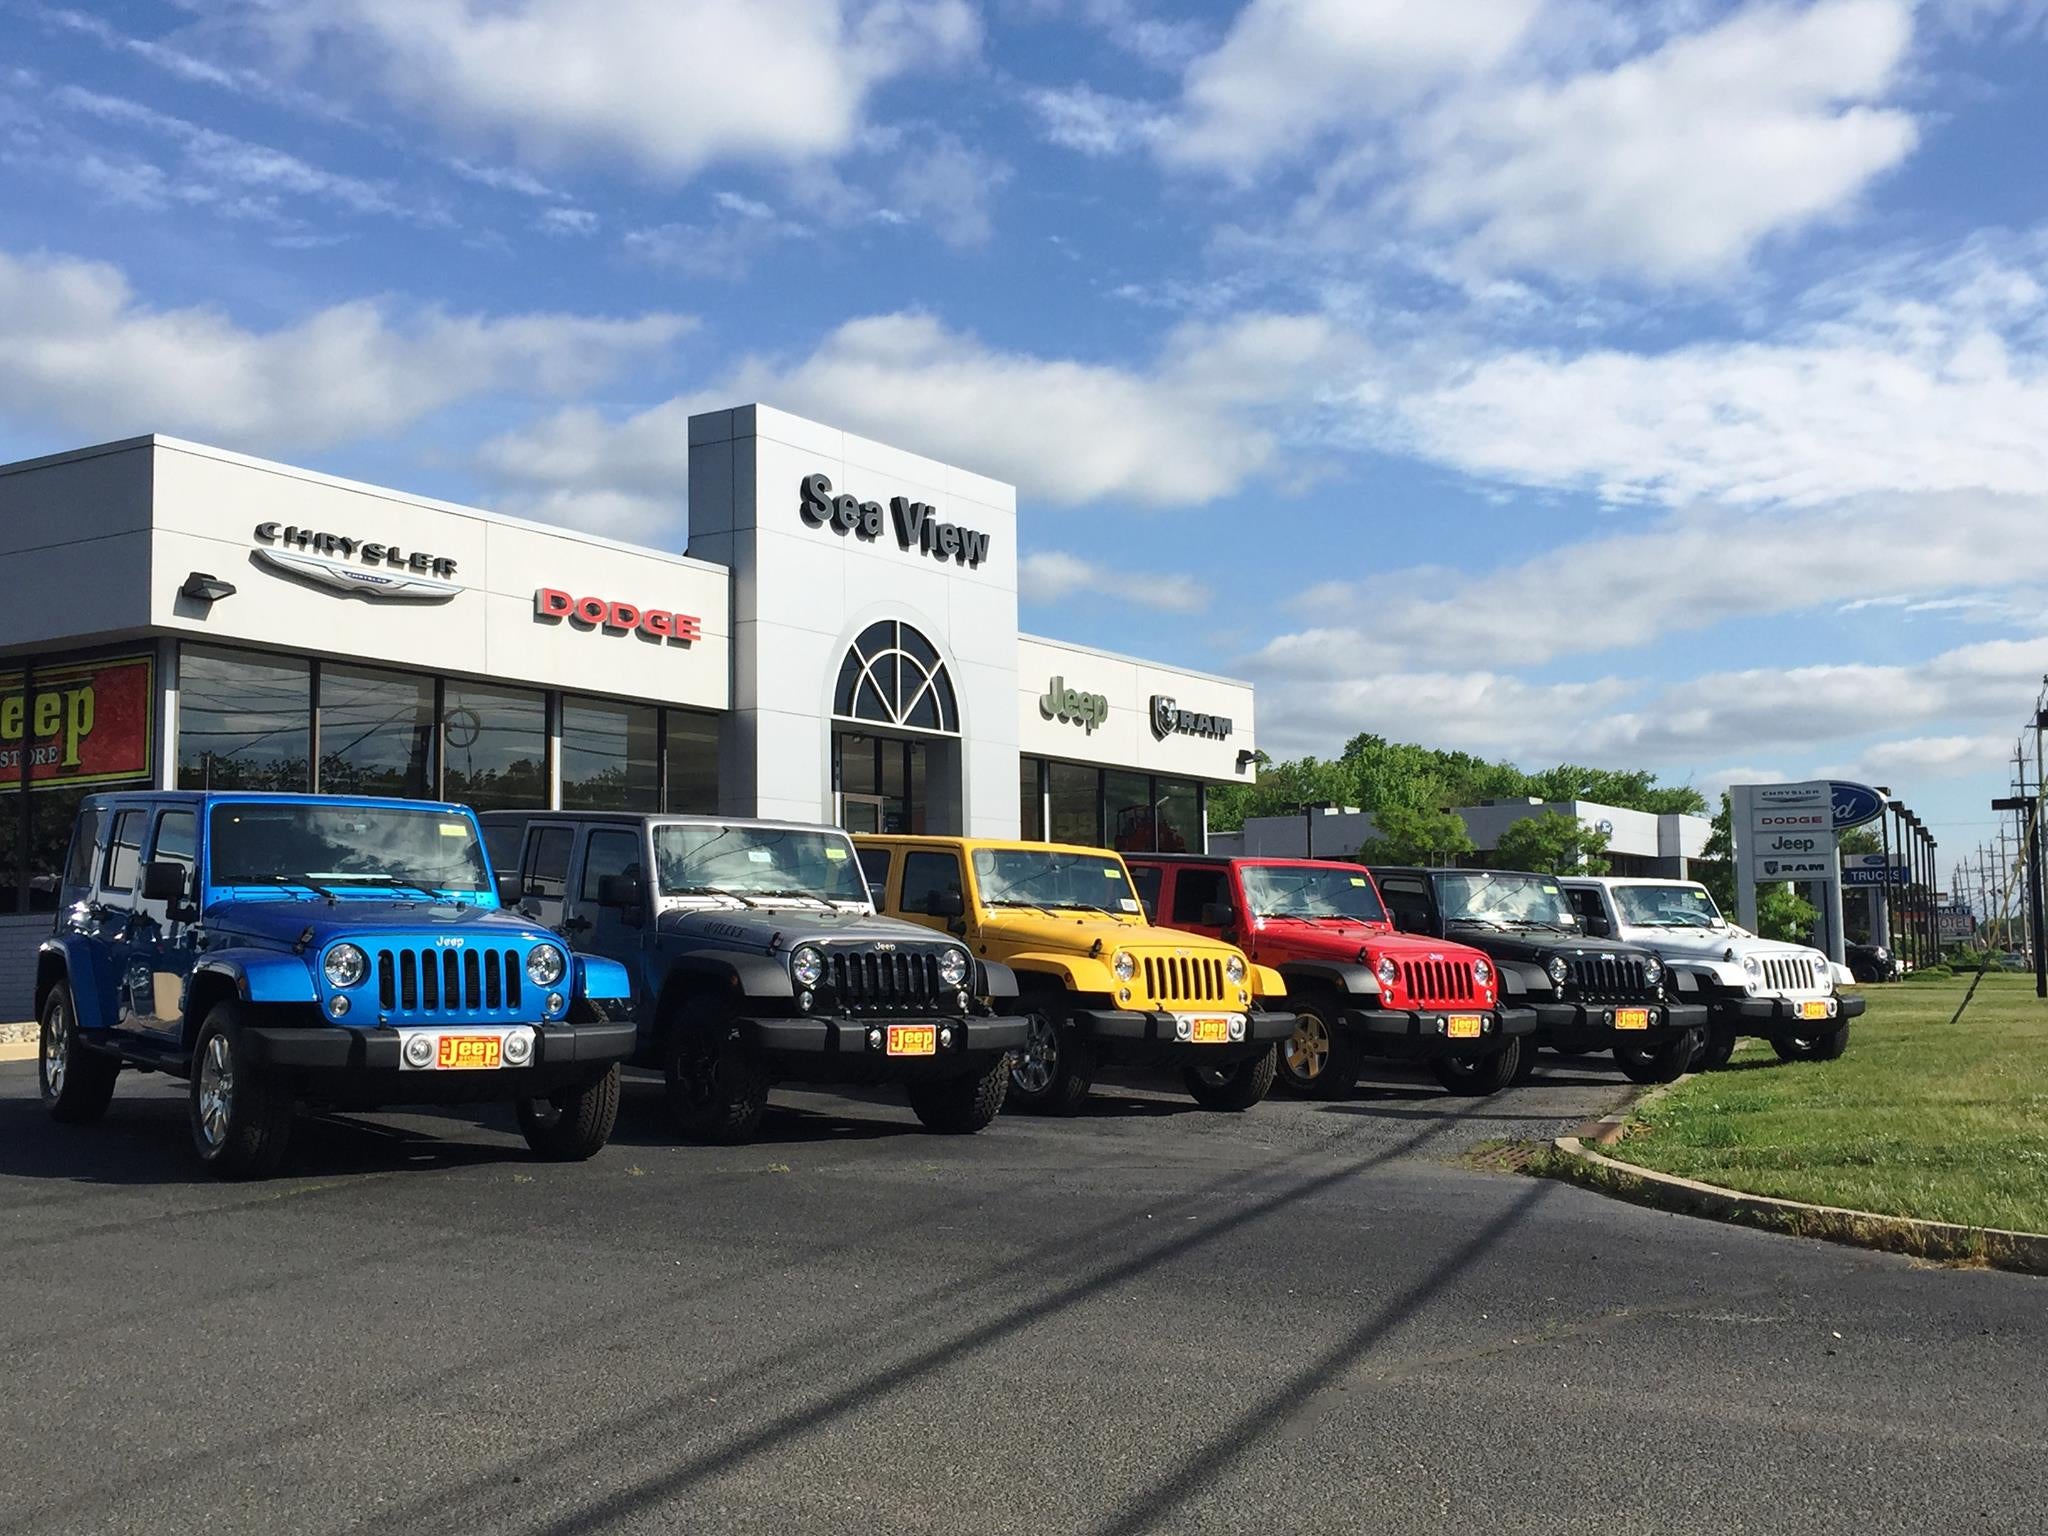 The Jeep Store in Ocean Township, NJ